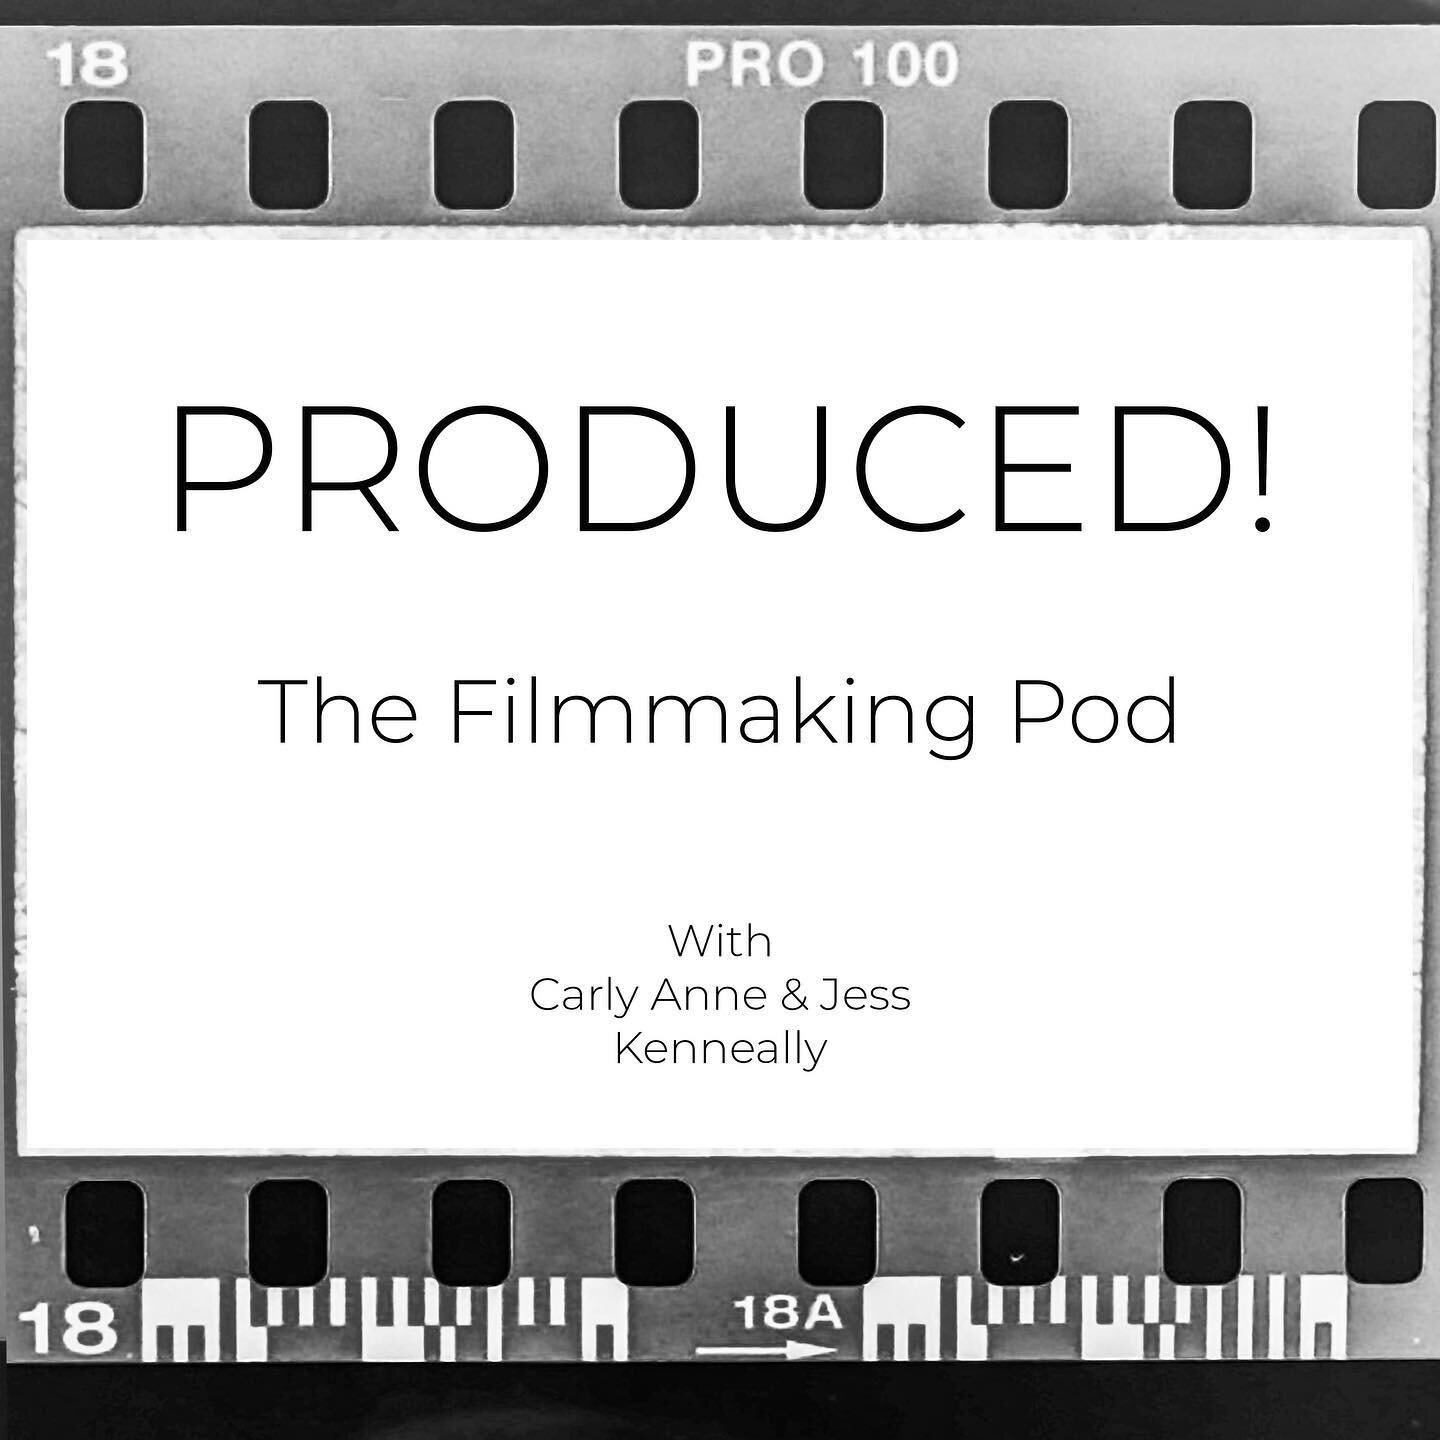 Our co-directors Carly Anne and Jess Kenneally are launching a new podcast 'Produced - The Filmmaking Pod' where they're going to take listeners through the trials, tribulations and trip hazards they experienced as first-time filmmakers. To celebrate